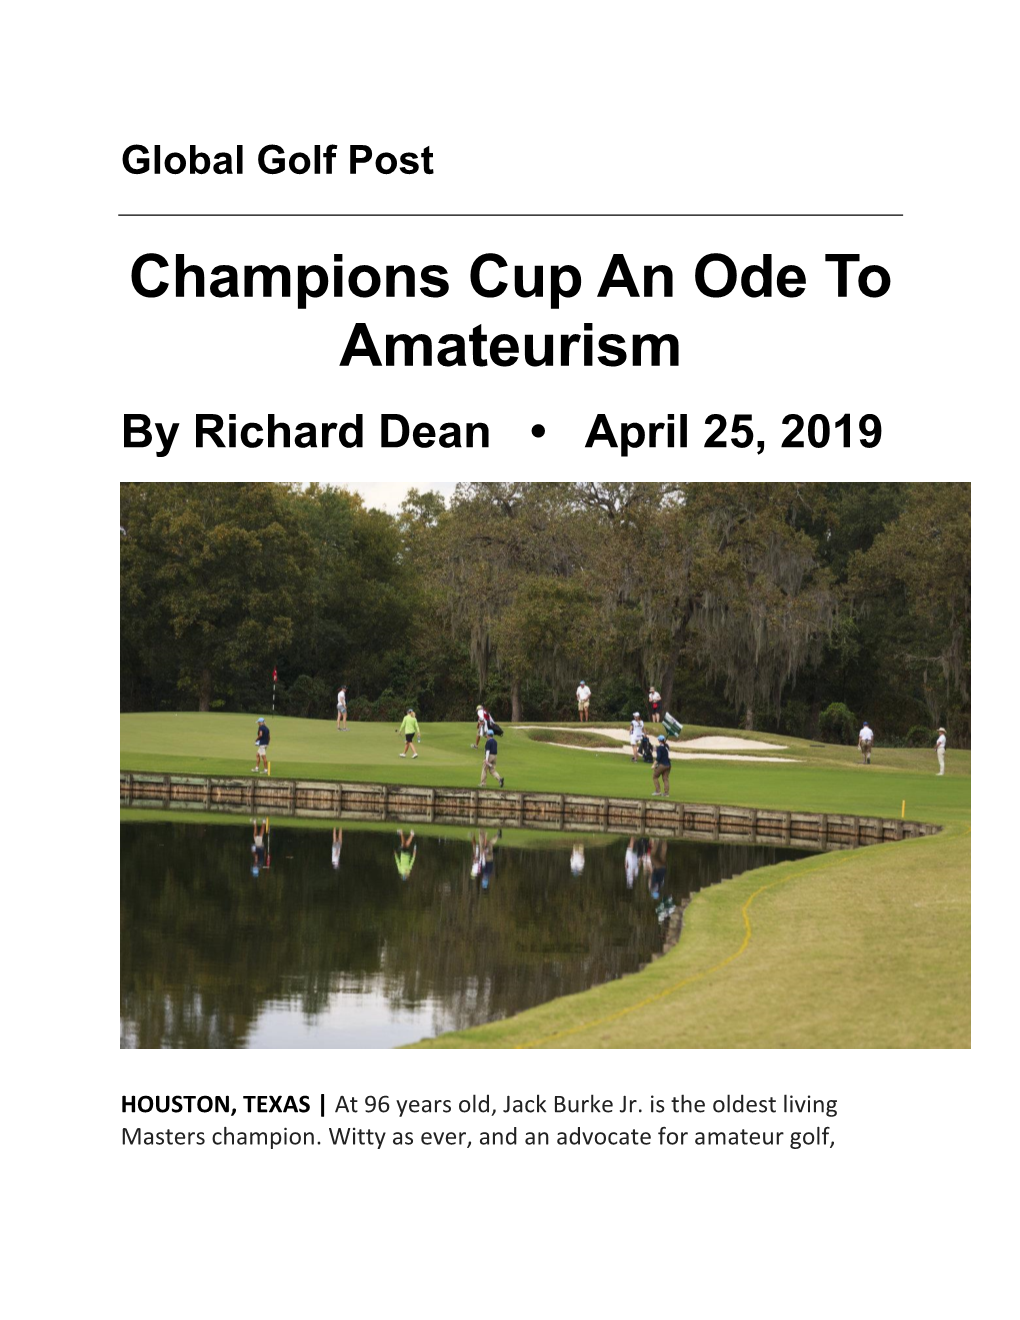 Champions Cup an Ode to Amateurism by Richard Dean • April 25, 2019